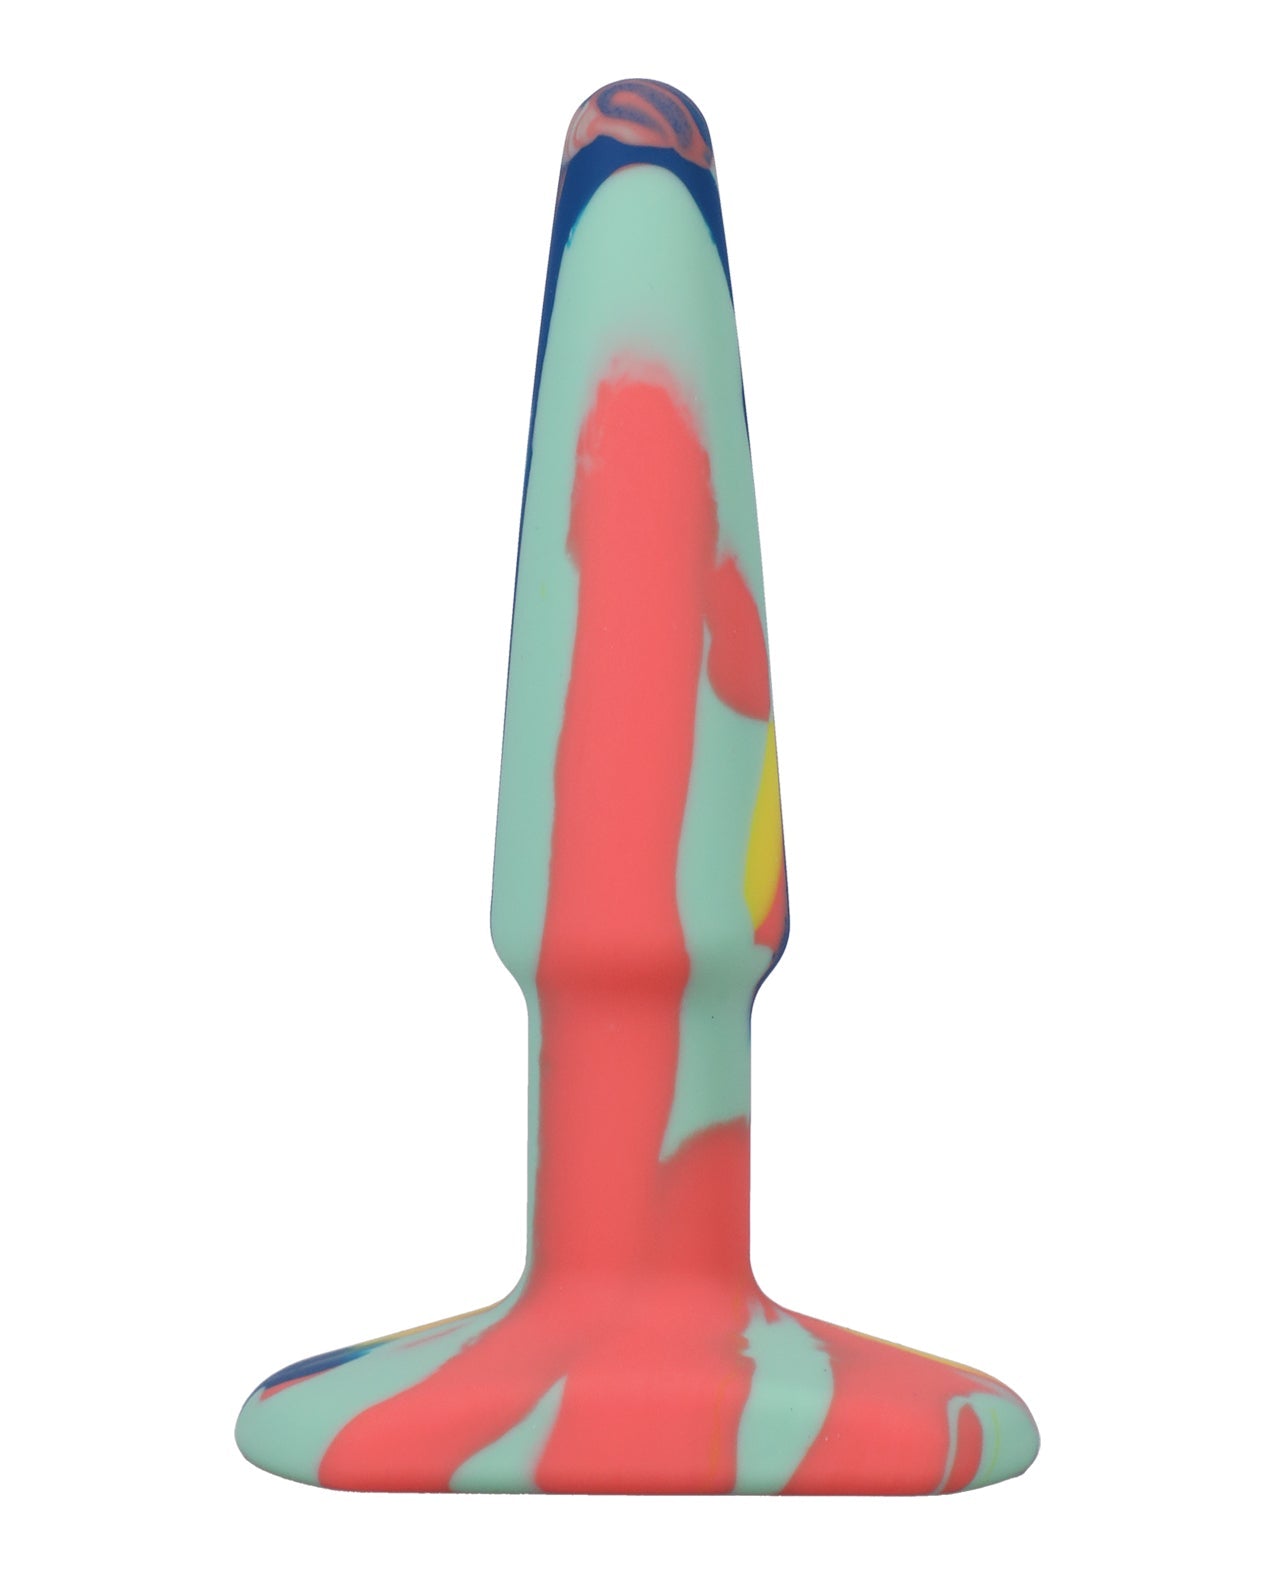 A Play 4" Groovy Silicone Anal Plug - Multicolor/Yellow